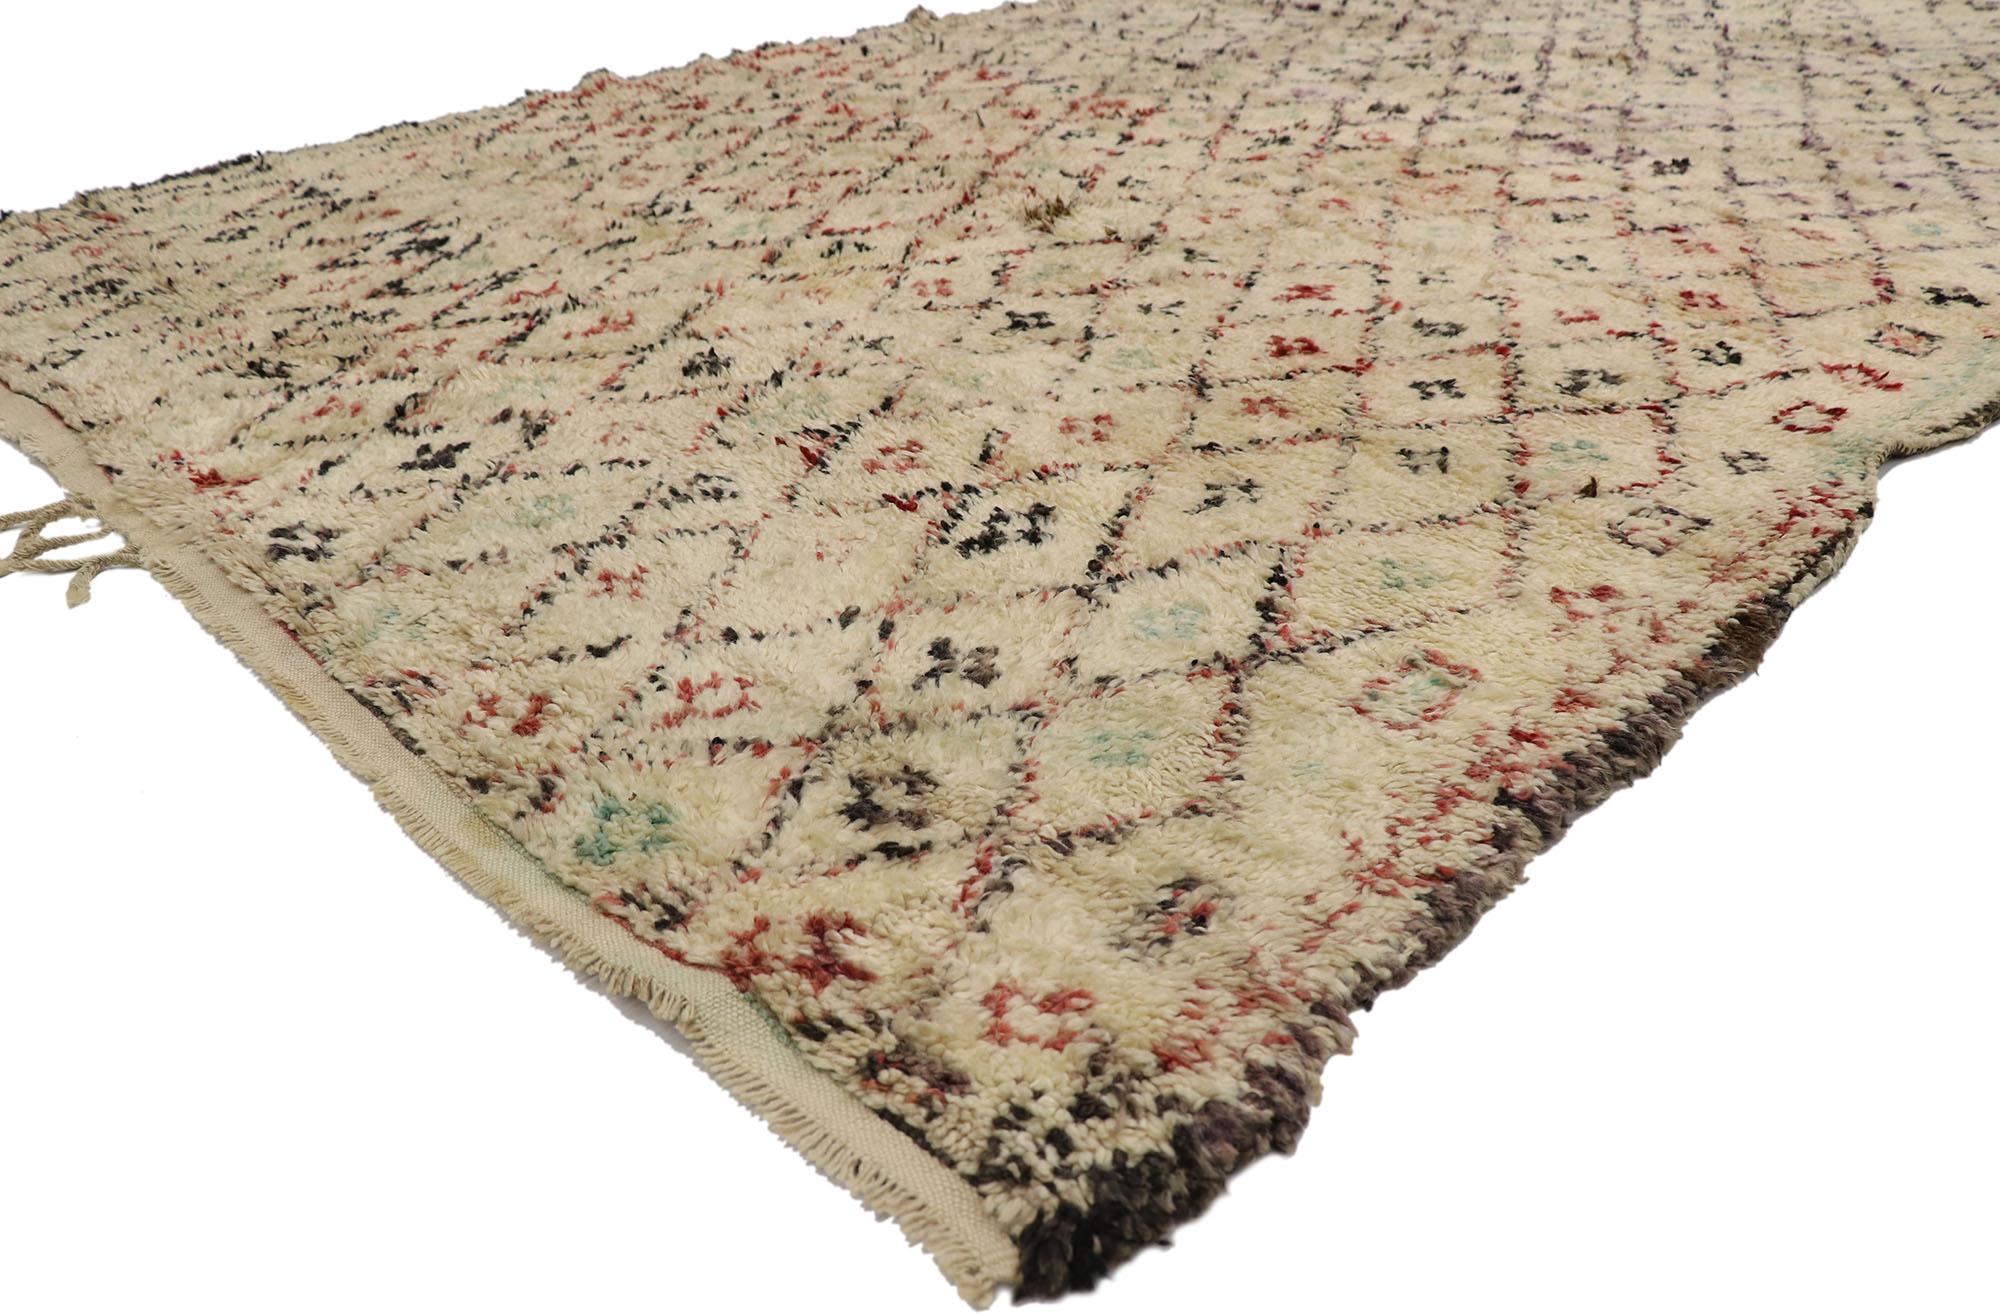 21513, vintage Berber Moroccan Beni Ourain rug with Tribal style. With its simplicity, plush pile and tribal style, this hand knotted wool vintage Berber Beni Ourain Moroccan rug is a captivating vision of woven beauty. It features a diamond lattice